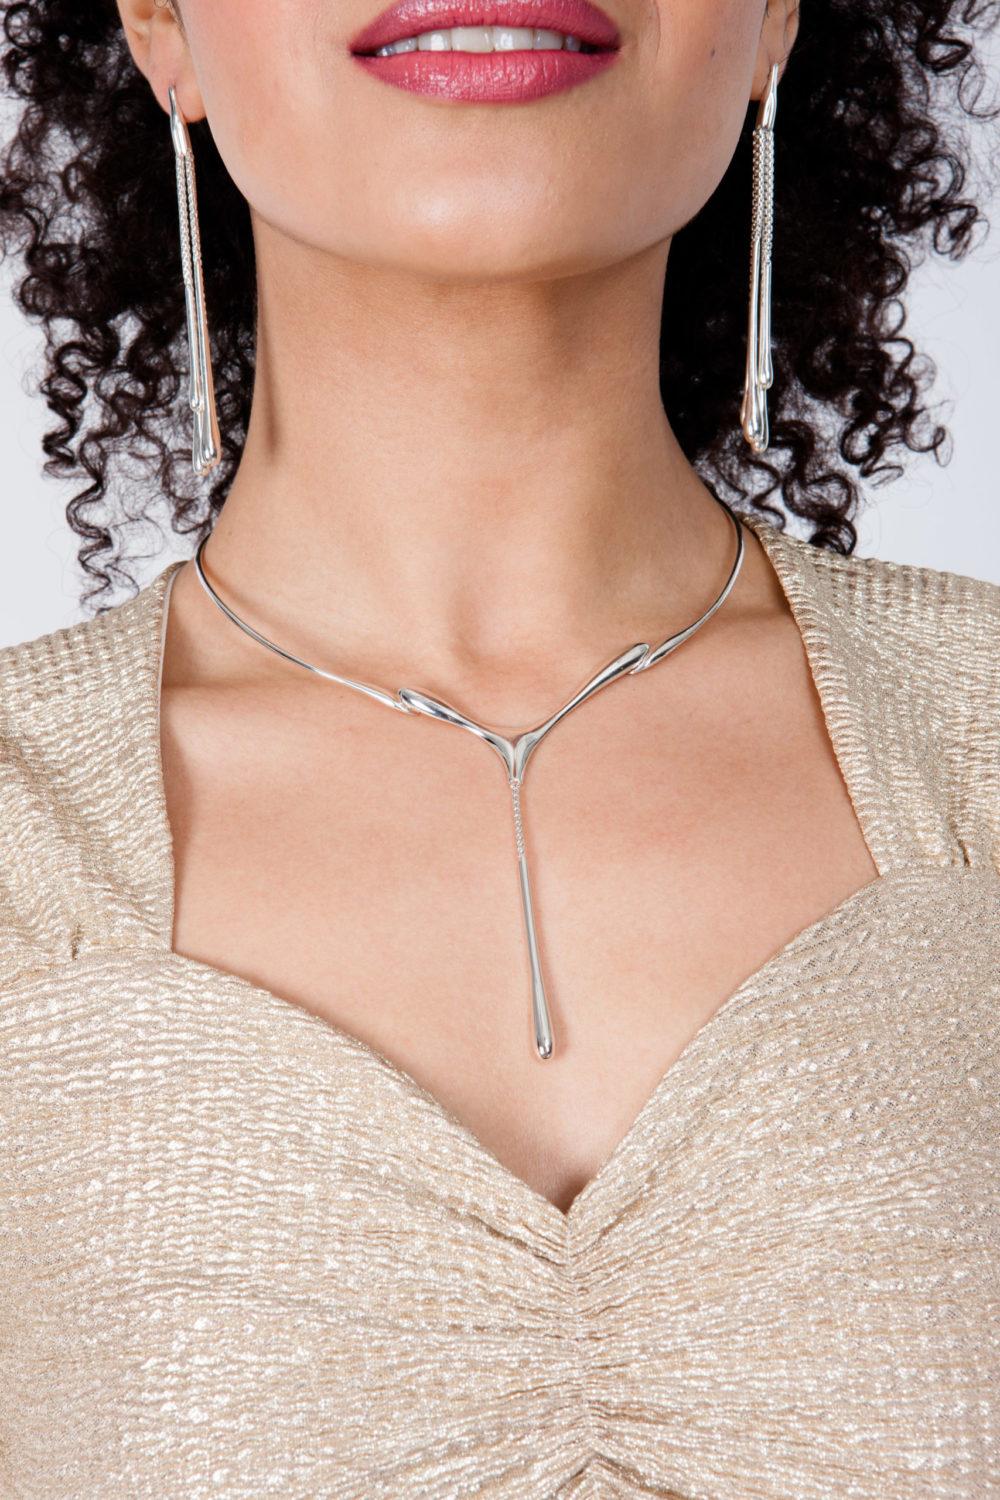 Elegant piece from the Drop collection. Y-shaped necklace of solid Sterling Silver featuring large drop dangling from a delicate chain. Beautifully crafted to give flowing fluid movement.

Hand Made from the highest quality 925 Sterling Silver and